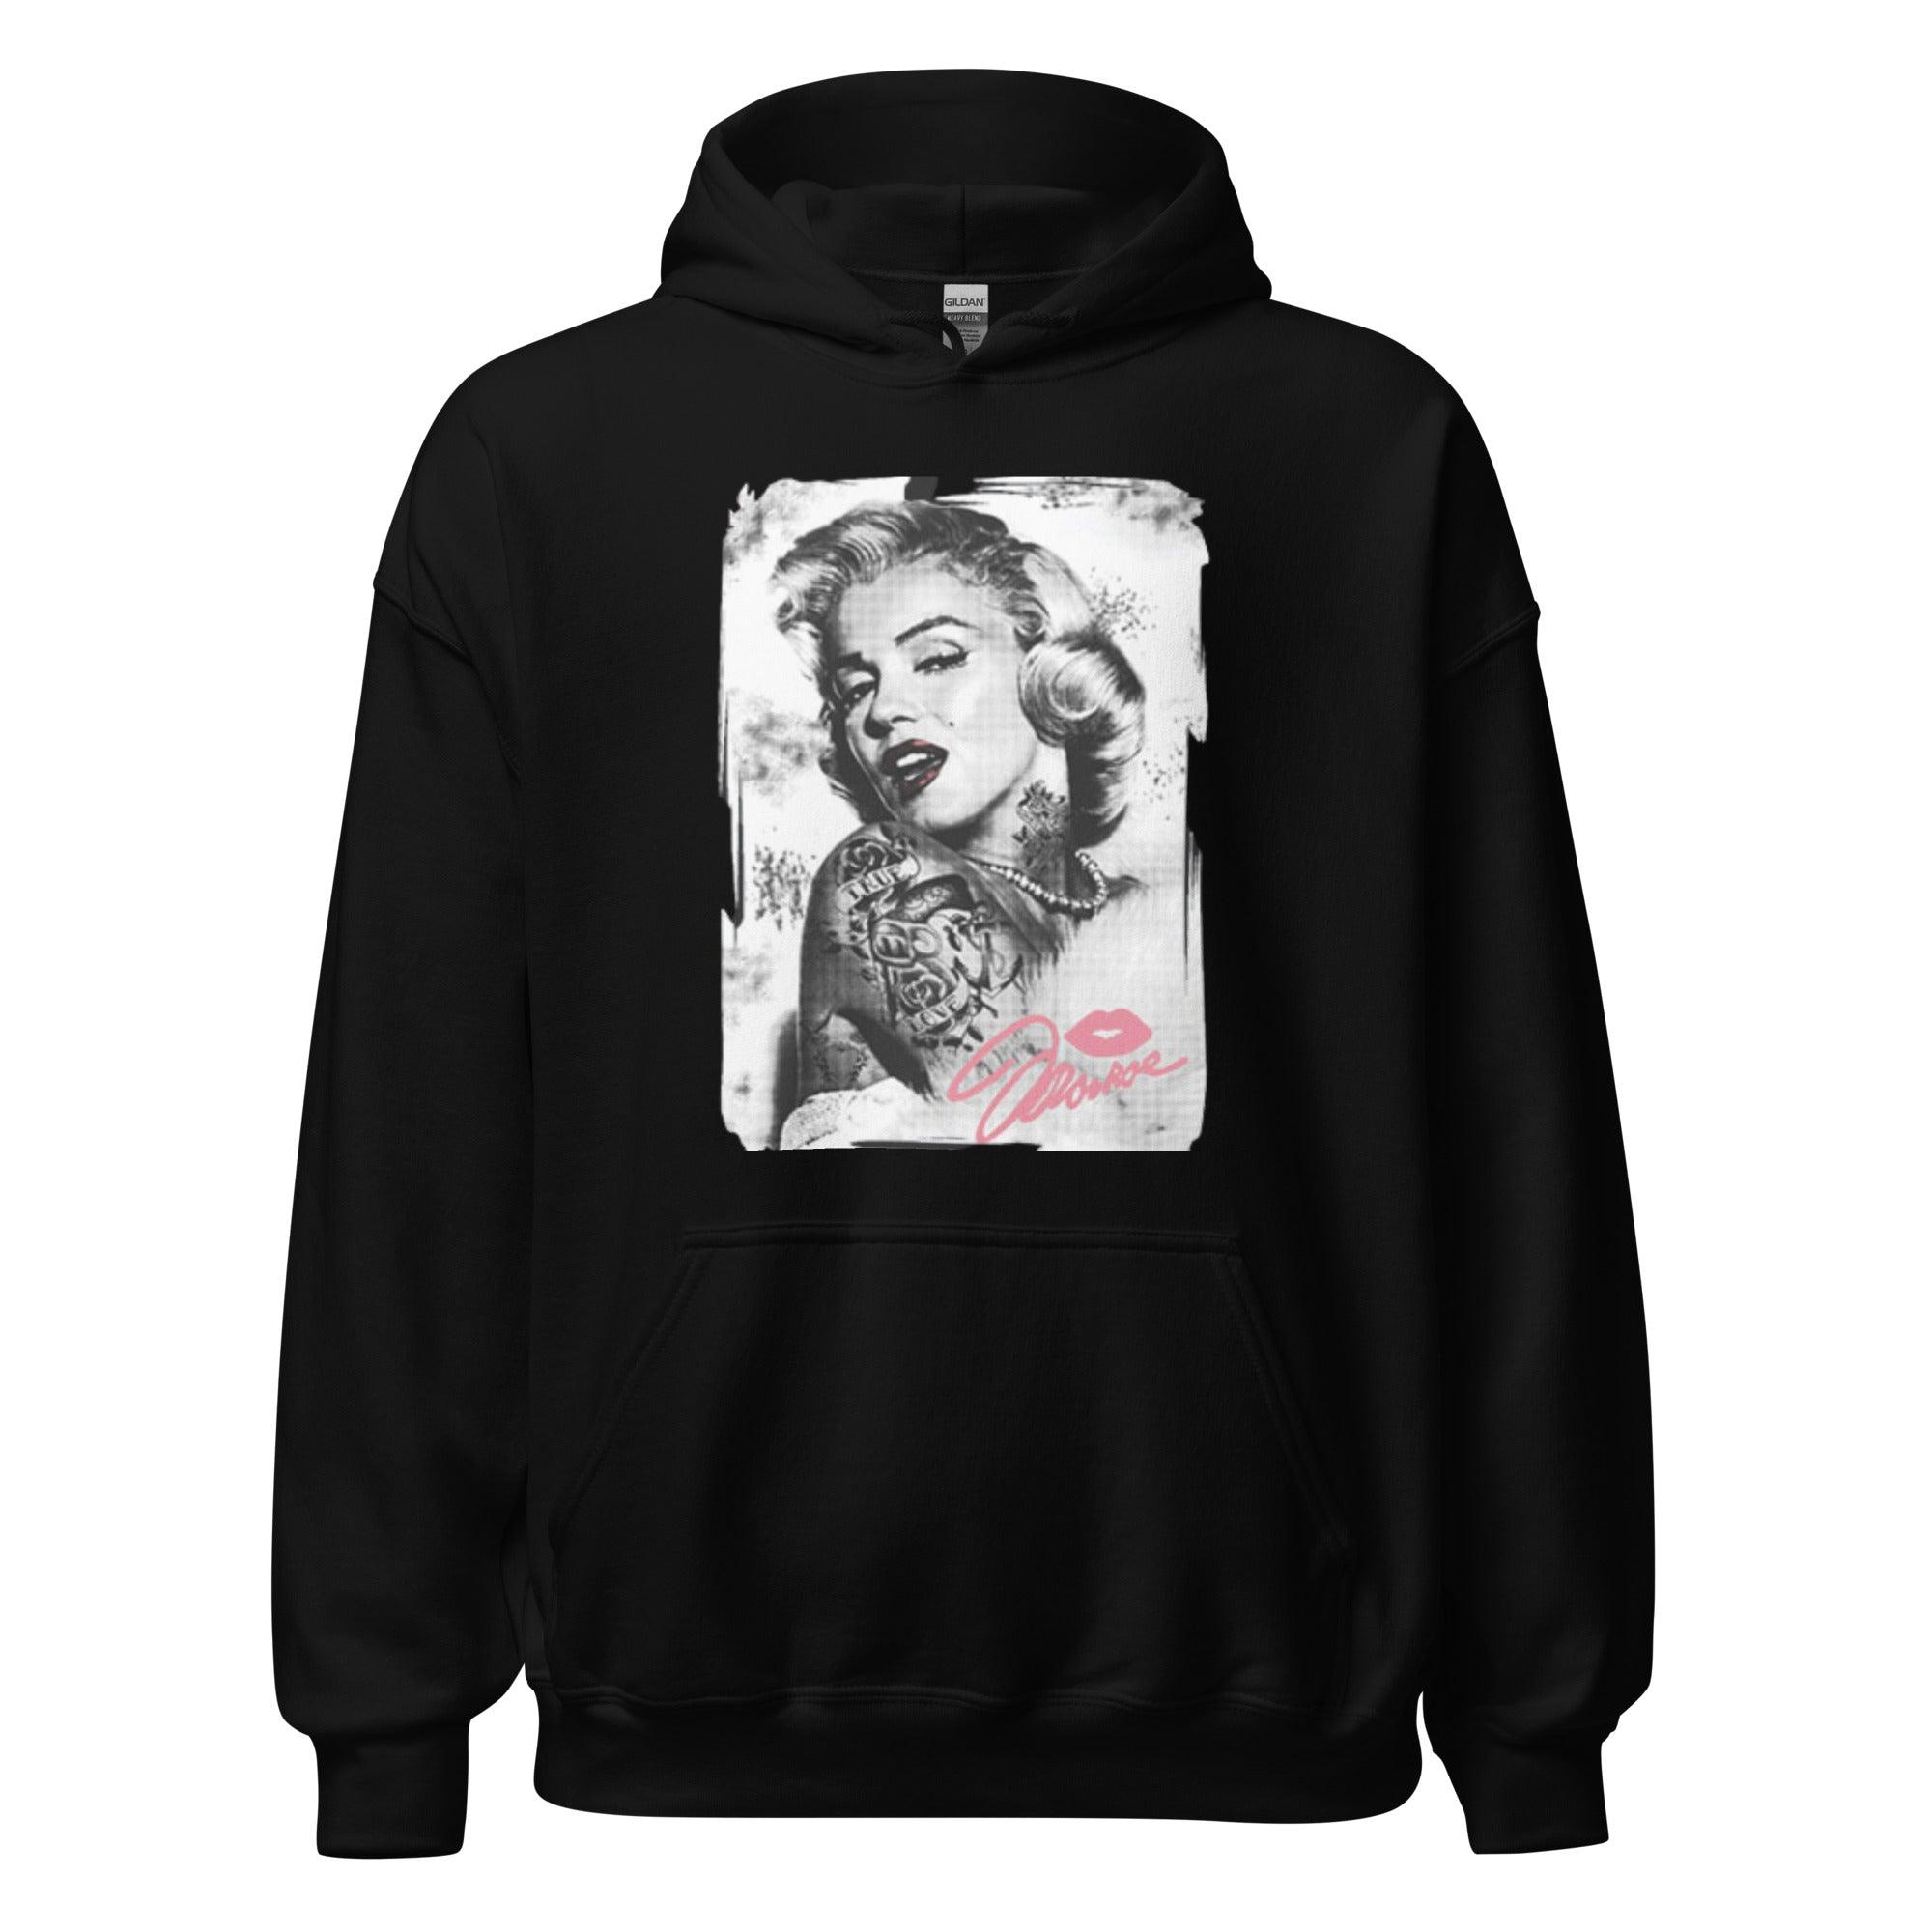 Blended Cotton Hoodie Autographed Portrait of Iconic Pinup Girl